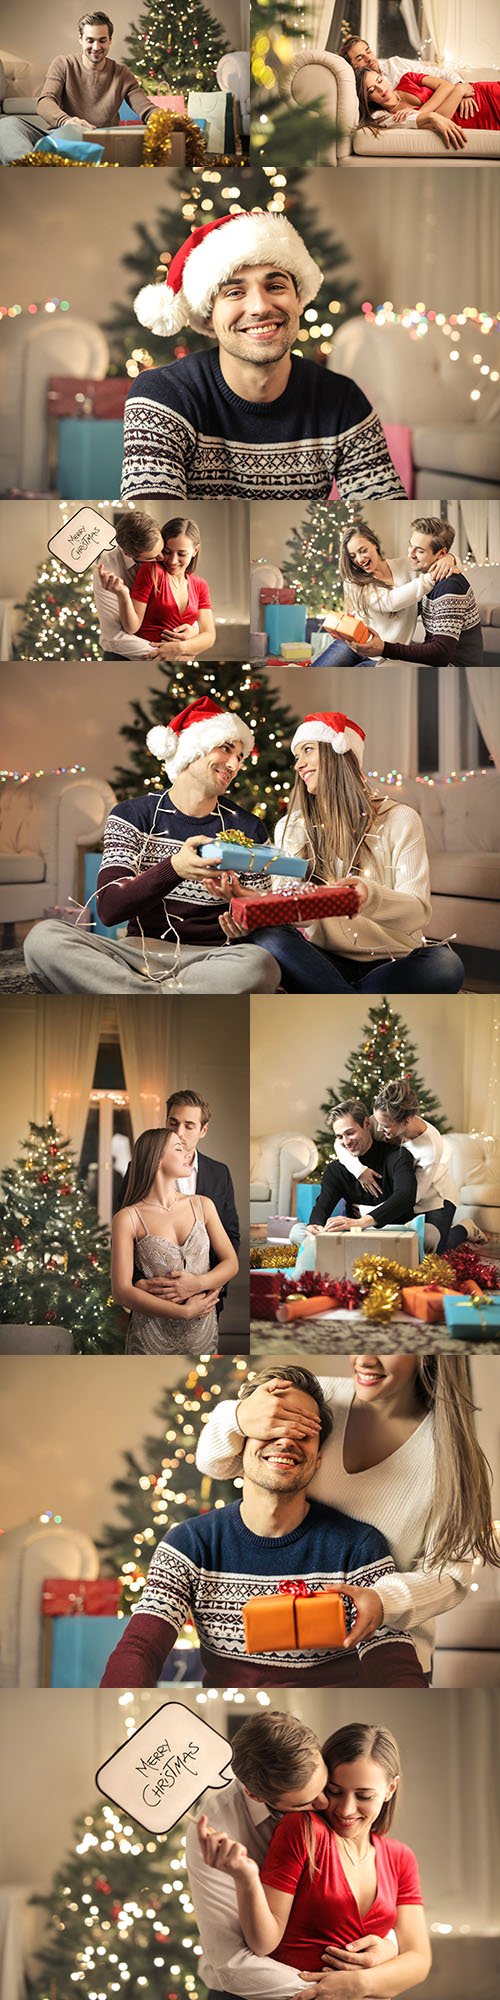 Christmas happy romantic couple in love with gifts